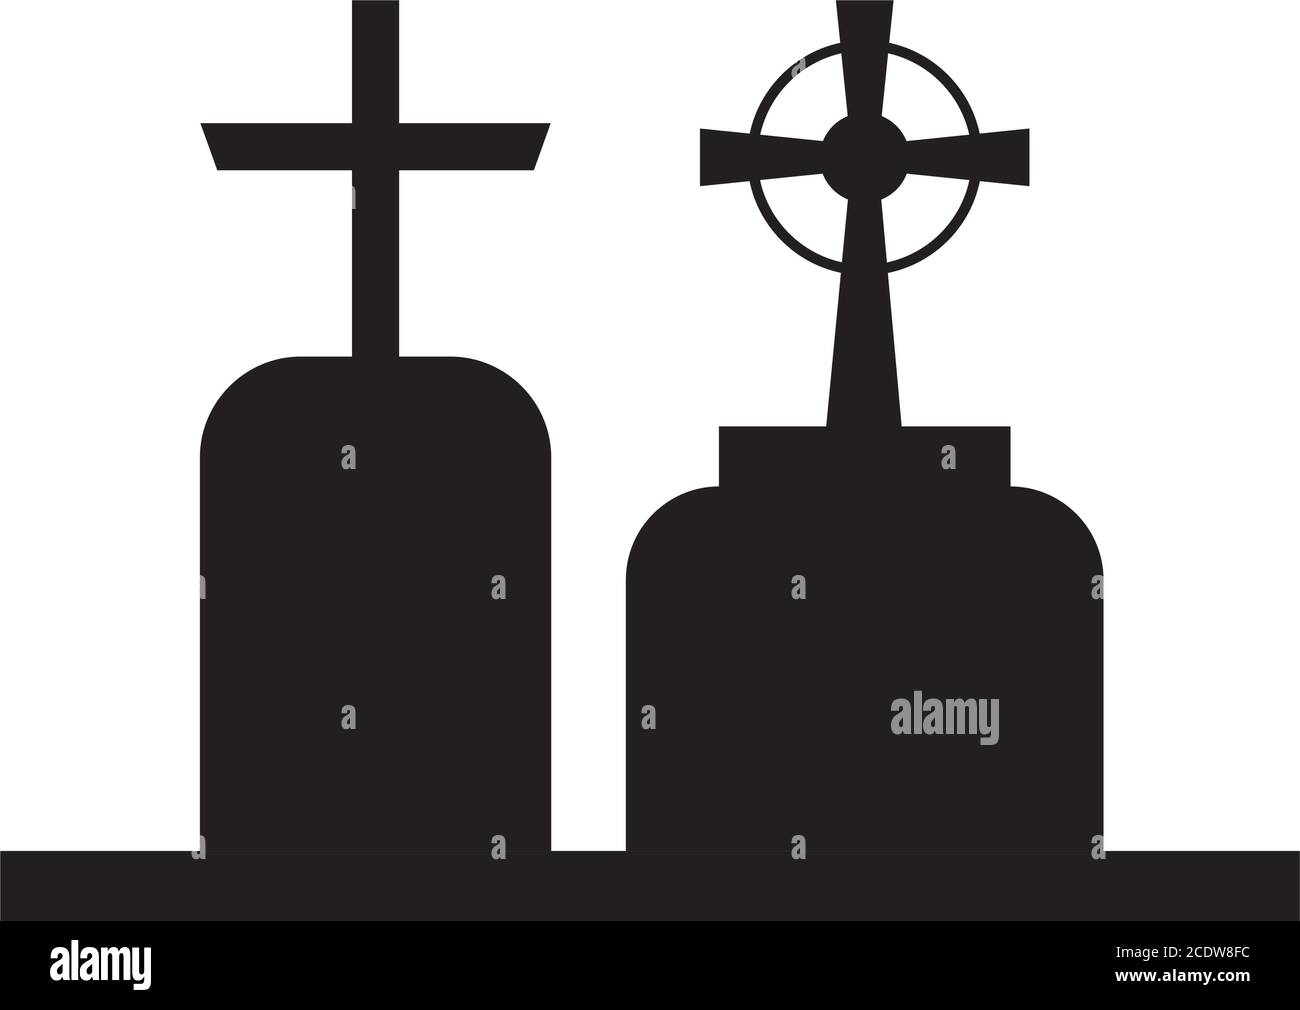 graves with crosses design, death tomb cementary and scary theme Vector illustration Stock Vector